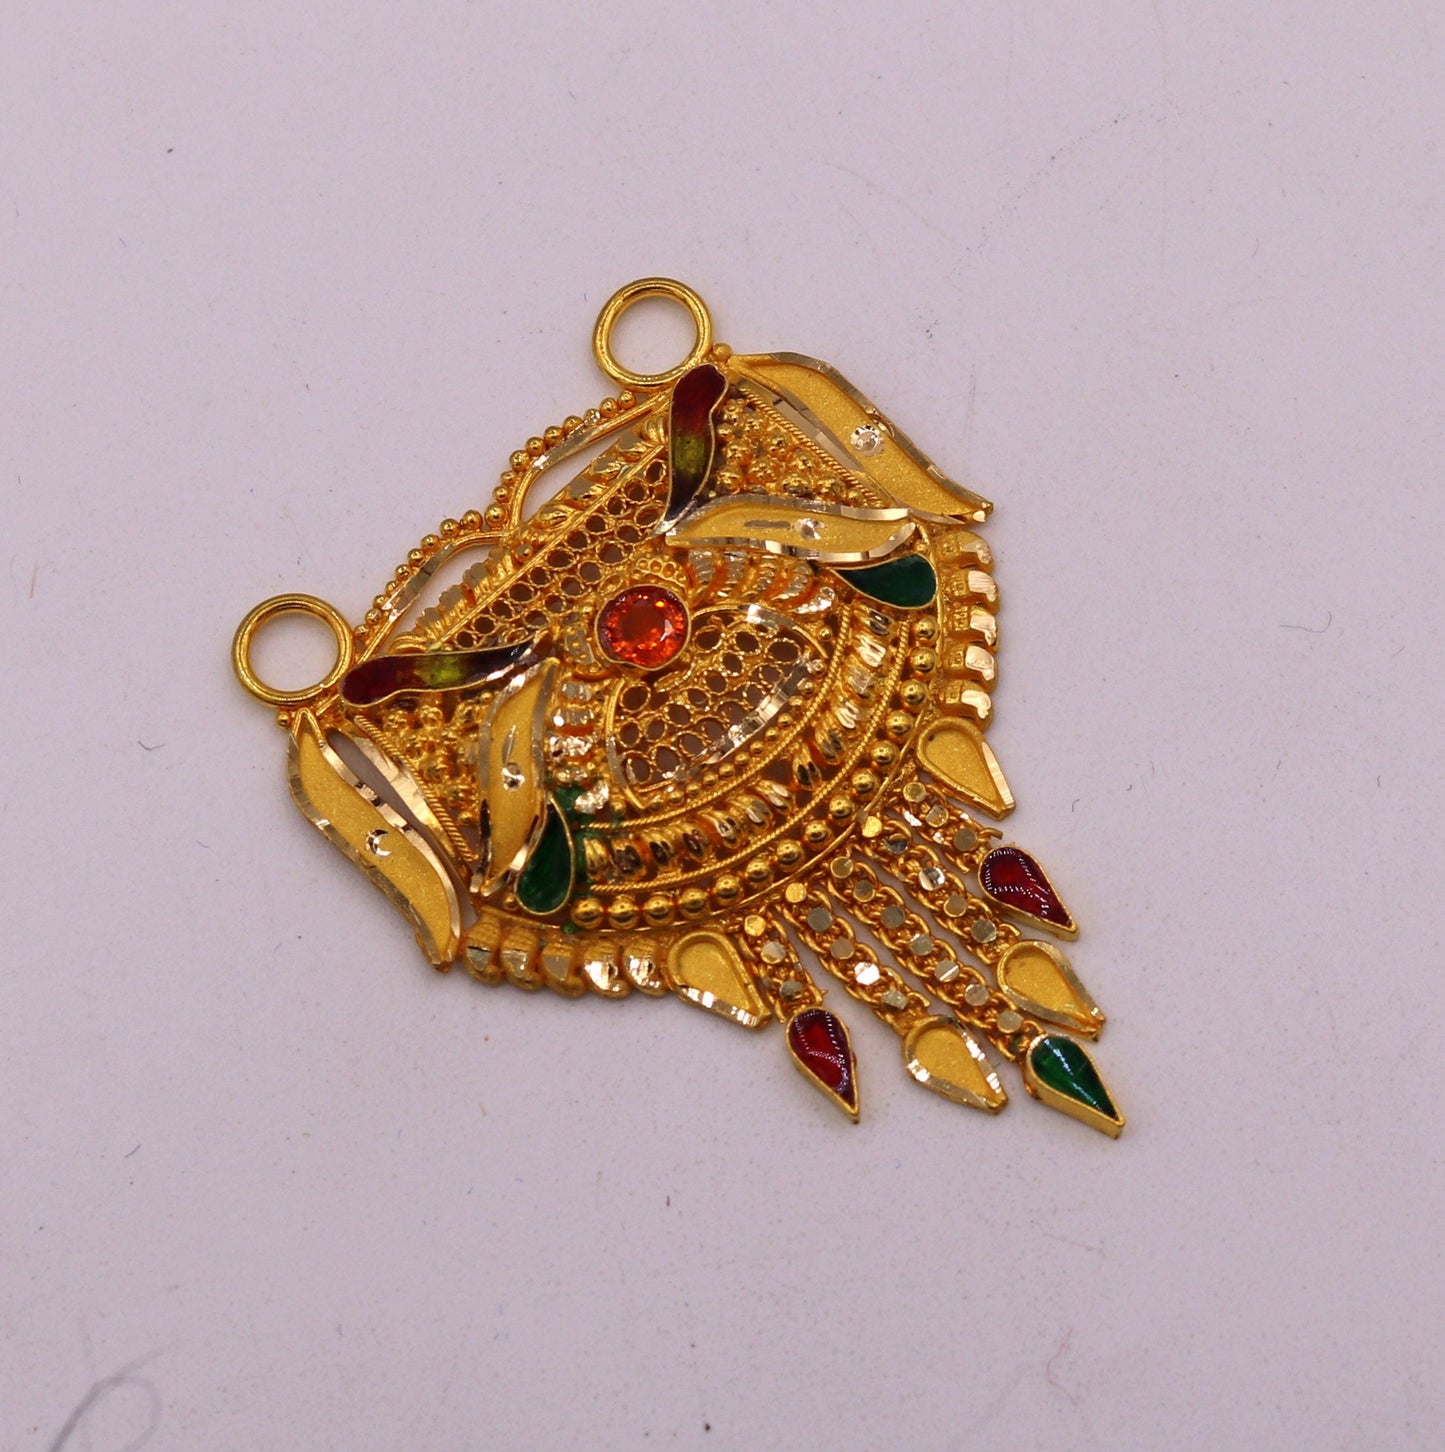 Antique desing Genuine certified 22kt yellow gold filigree work meenakari pendant necklace traditional art of indian tribal jewelry gp15 - TRIBAL ORNAMENTS